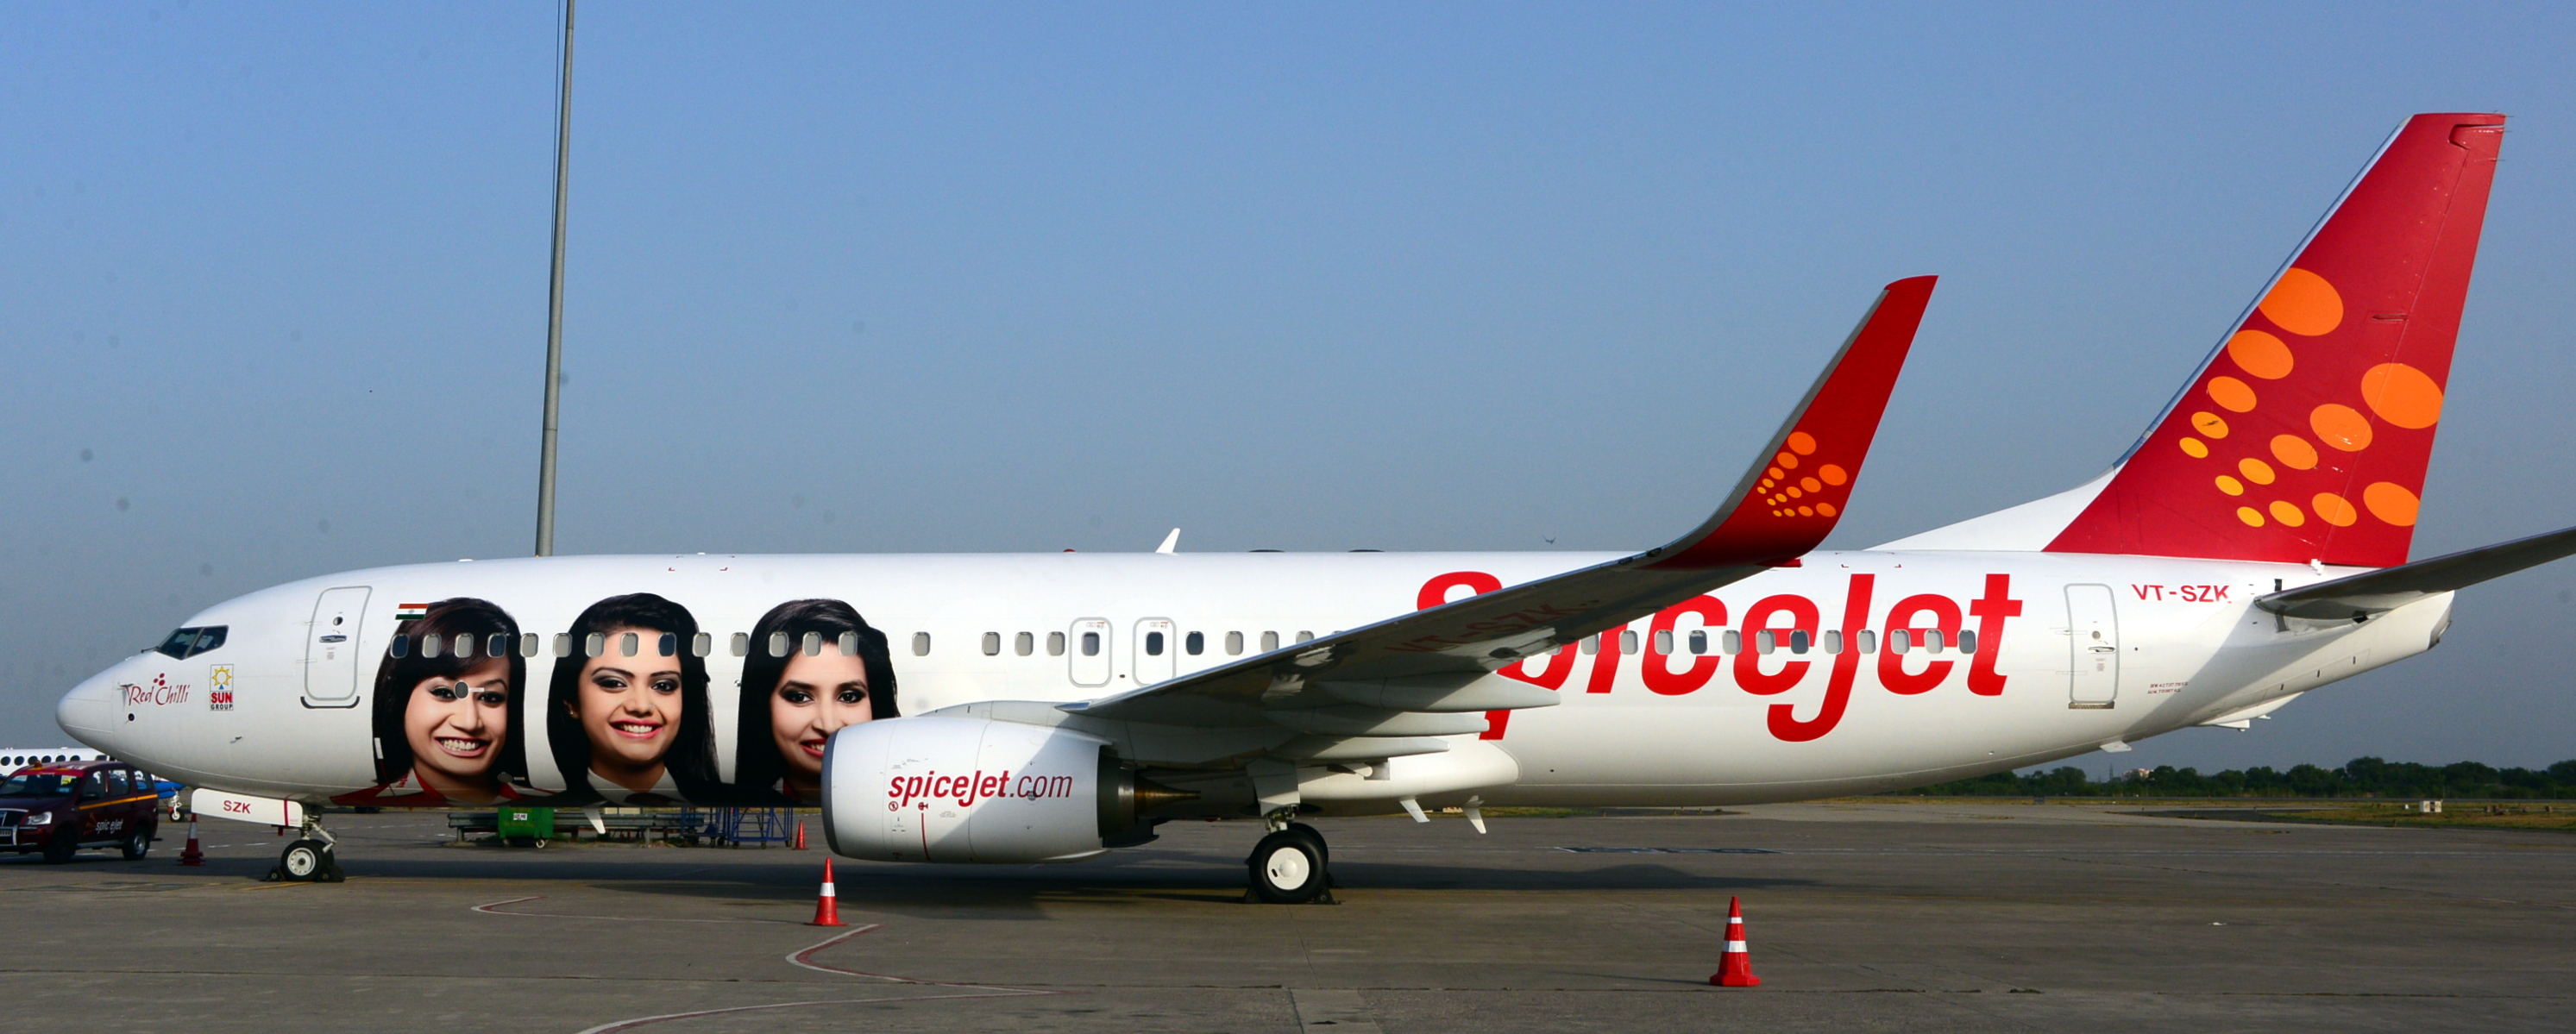 SPICEJET UNVEILS NEW BOEING WITH SPECIAL ���CREW LIVERY��� | Article.